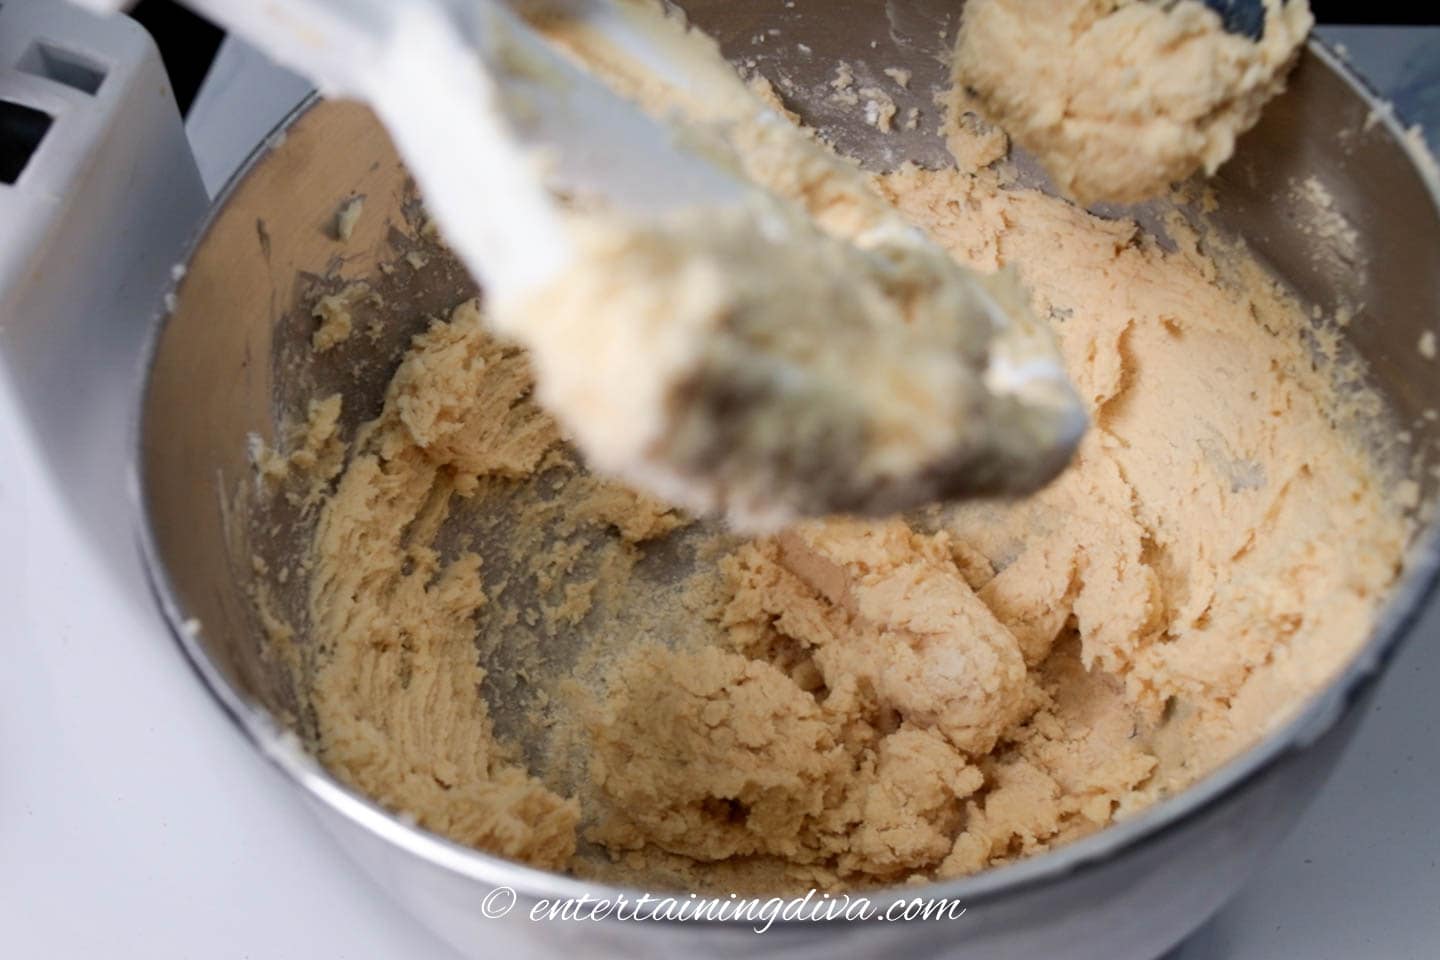 Whipped shortbread cookie dough in the mixer